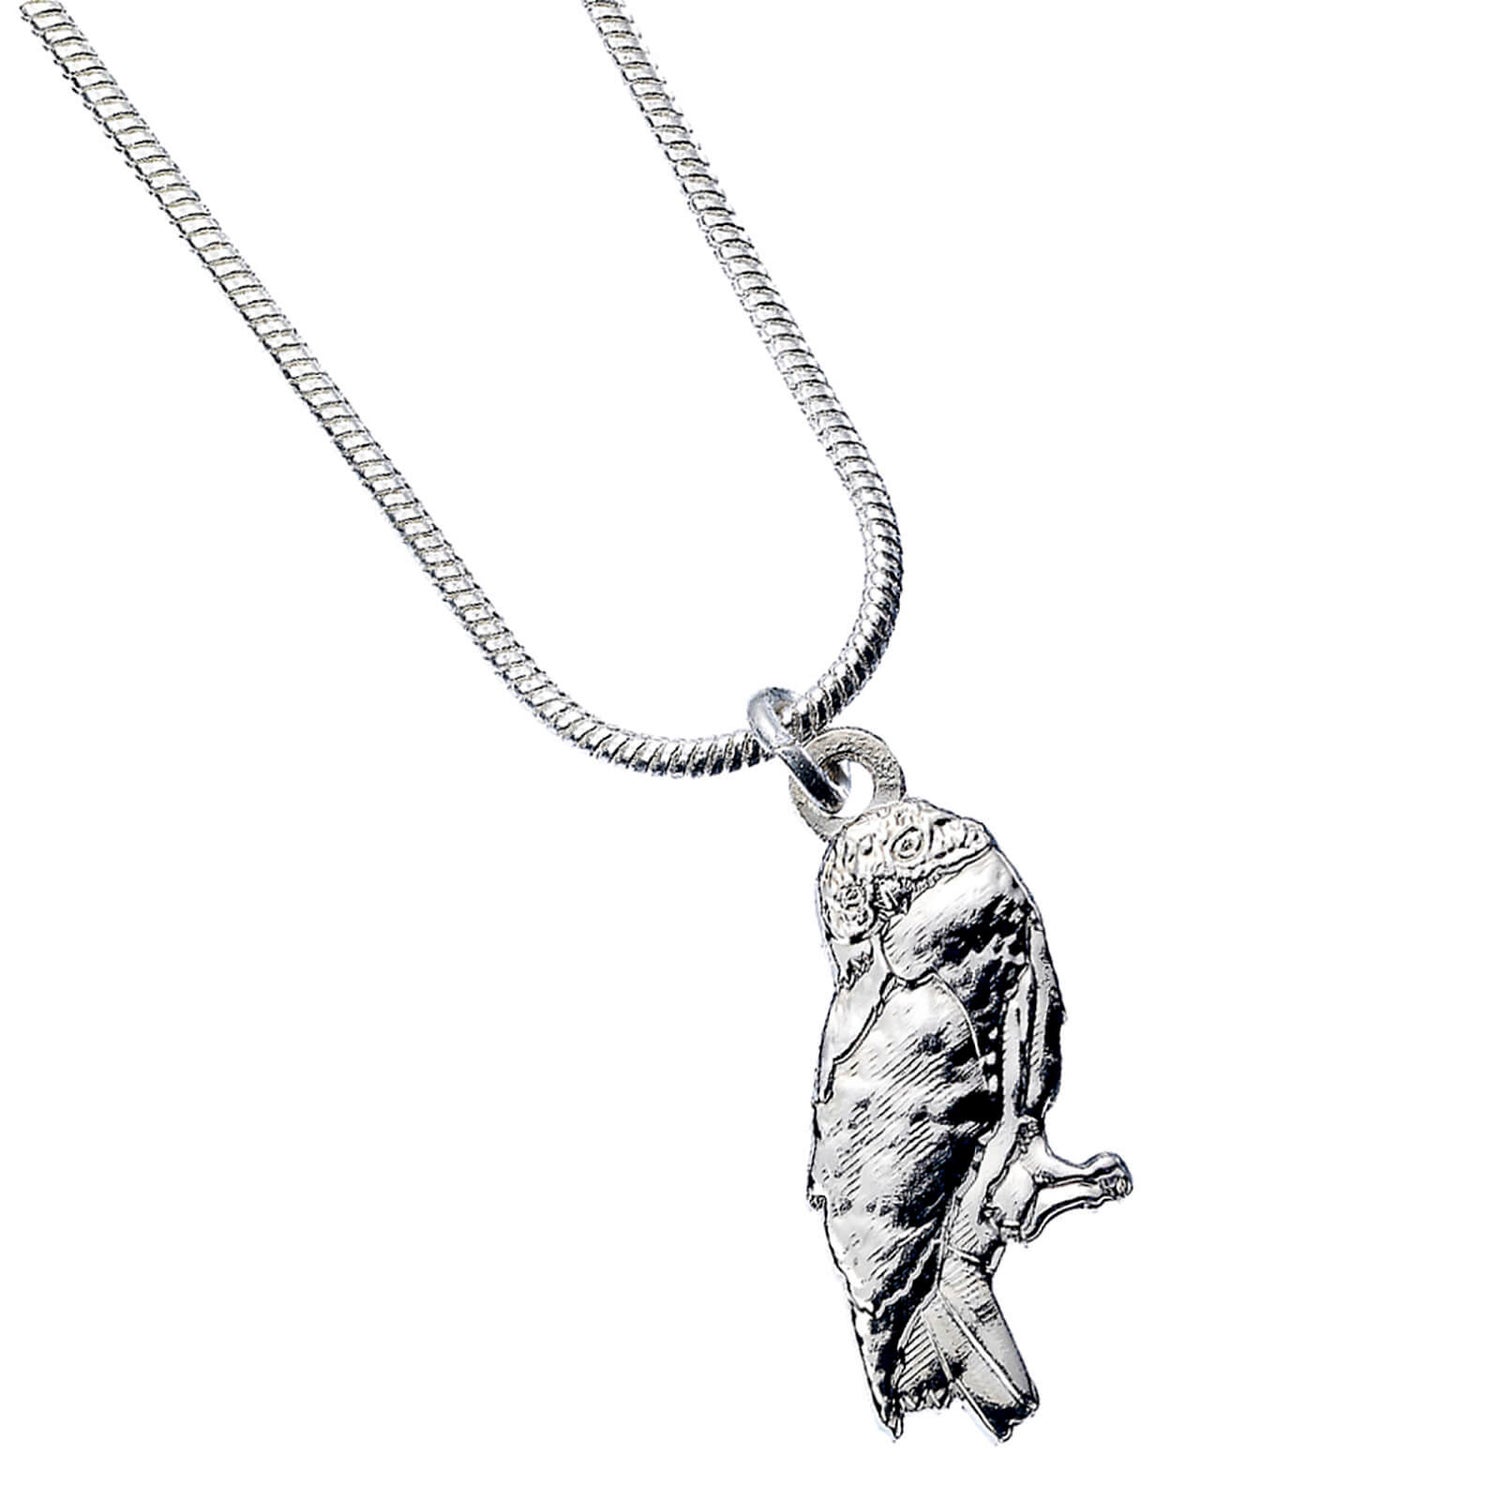 Harry Potter Hedwig the Owl Necklace - Silver